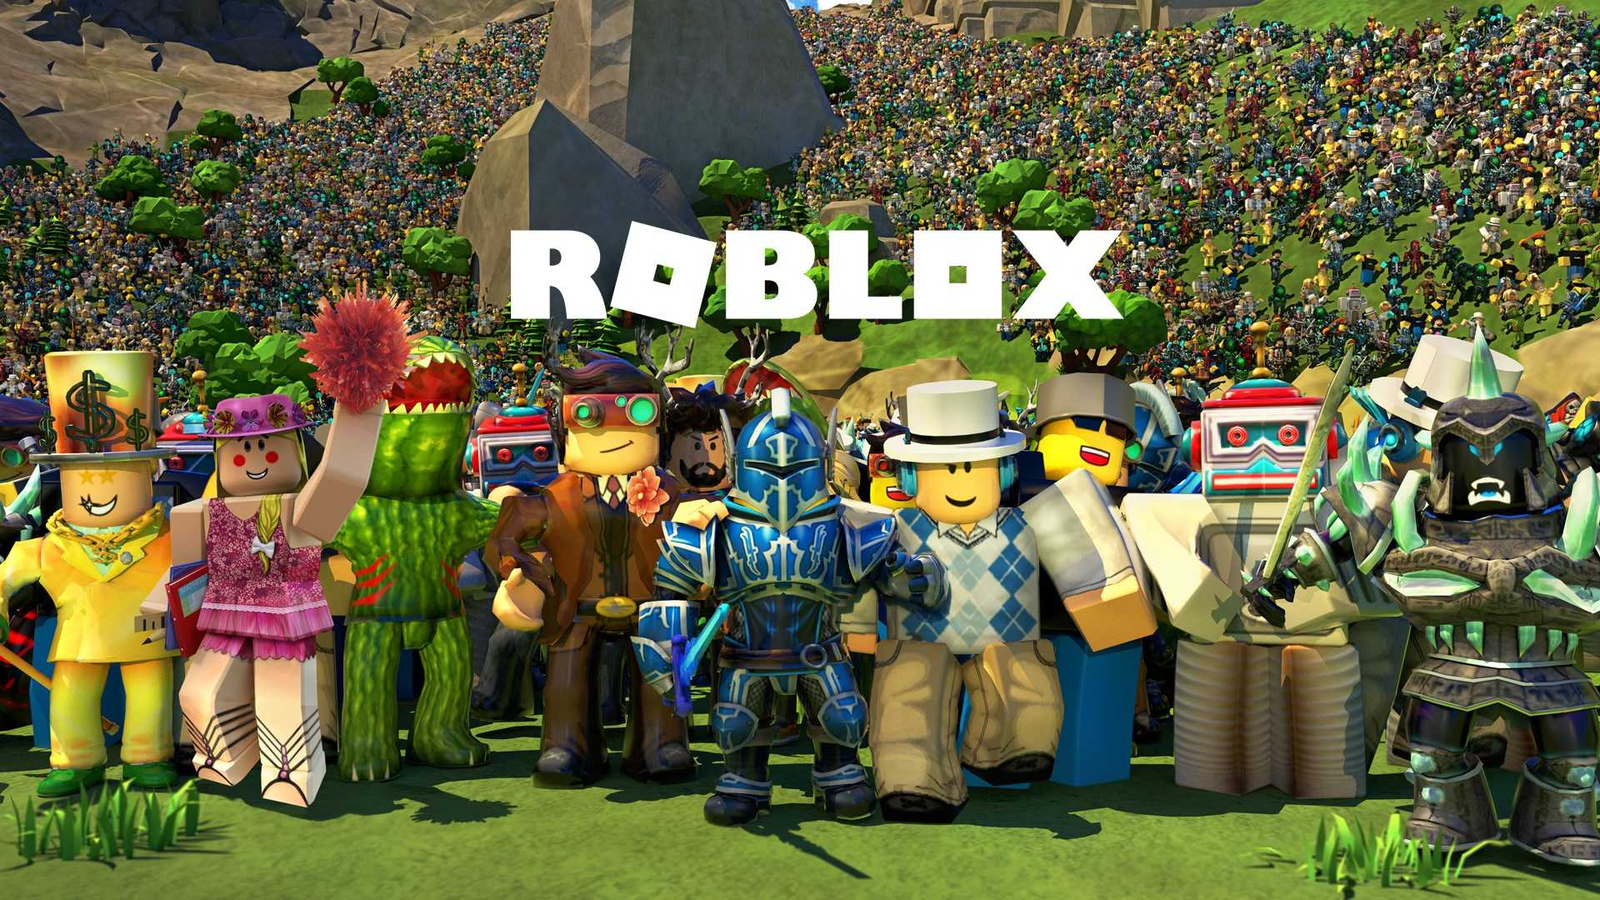 Try out all this and more on our Roblox game, Cartoon Network Game